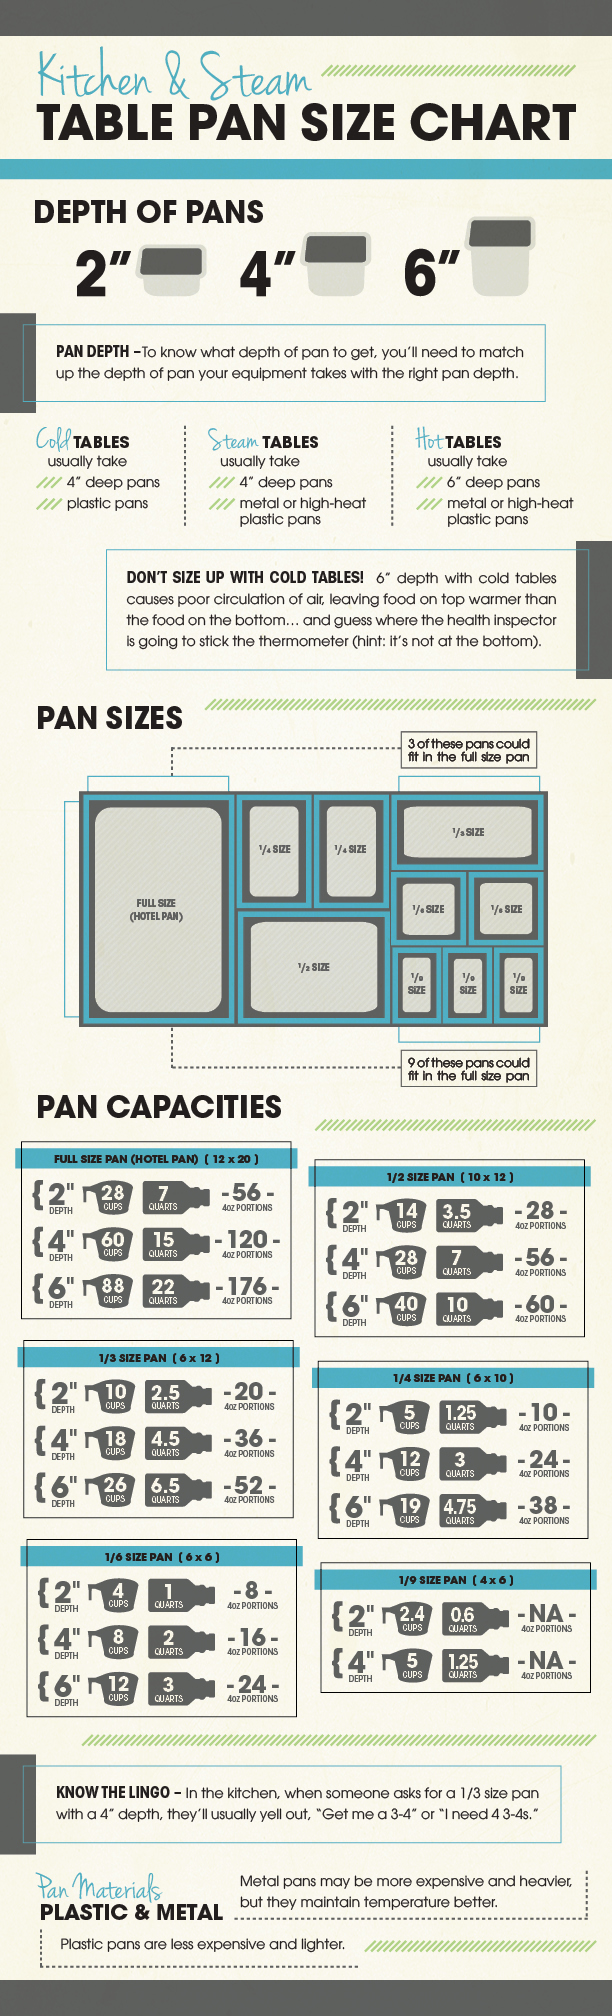 Kitchen & Steam Table Pan Size Chart [Free Download ...